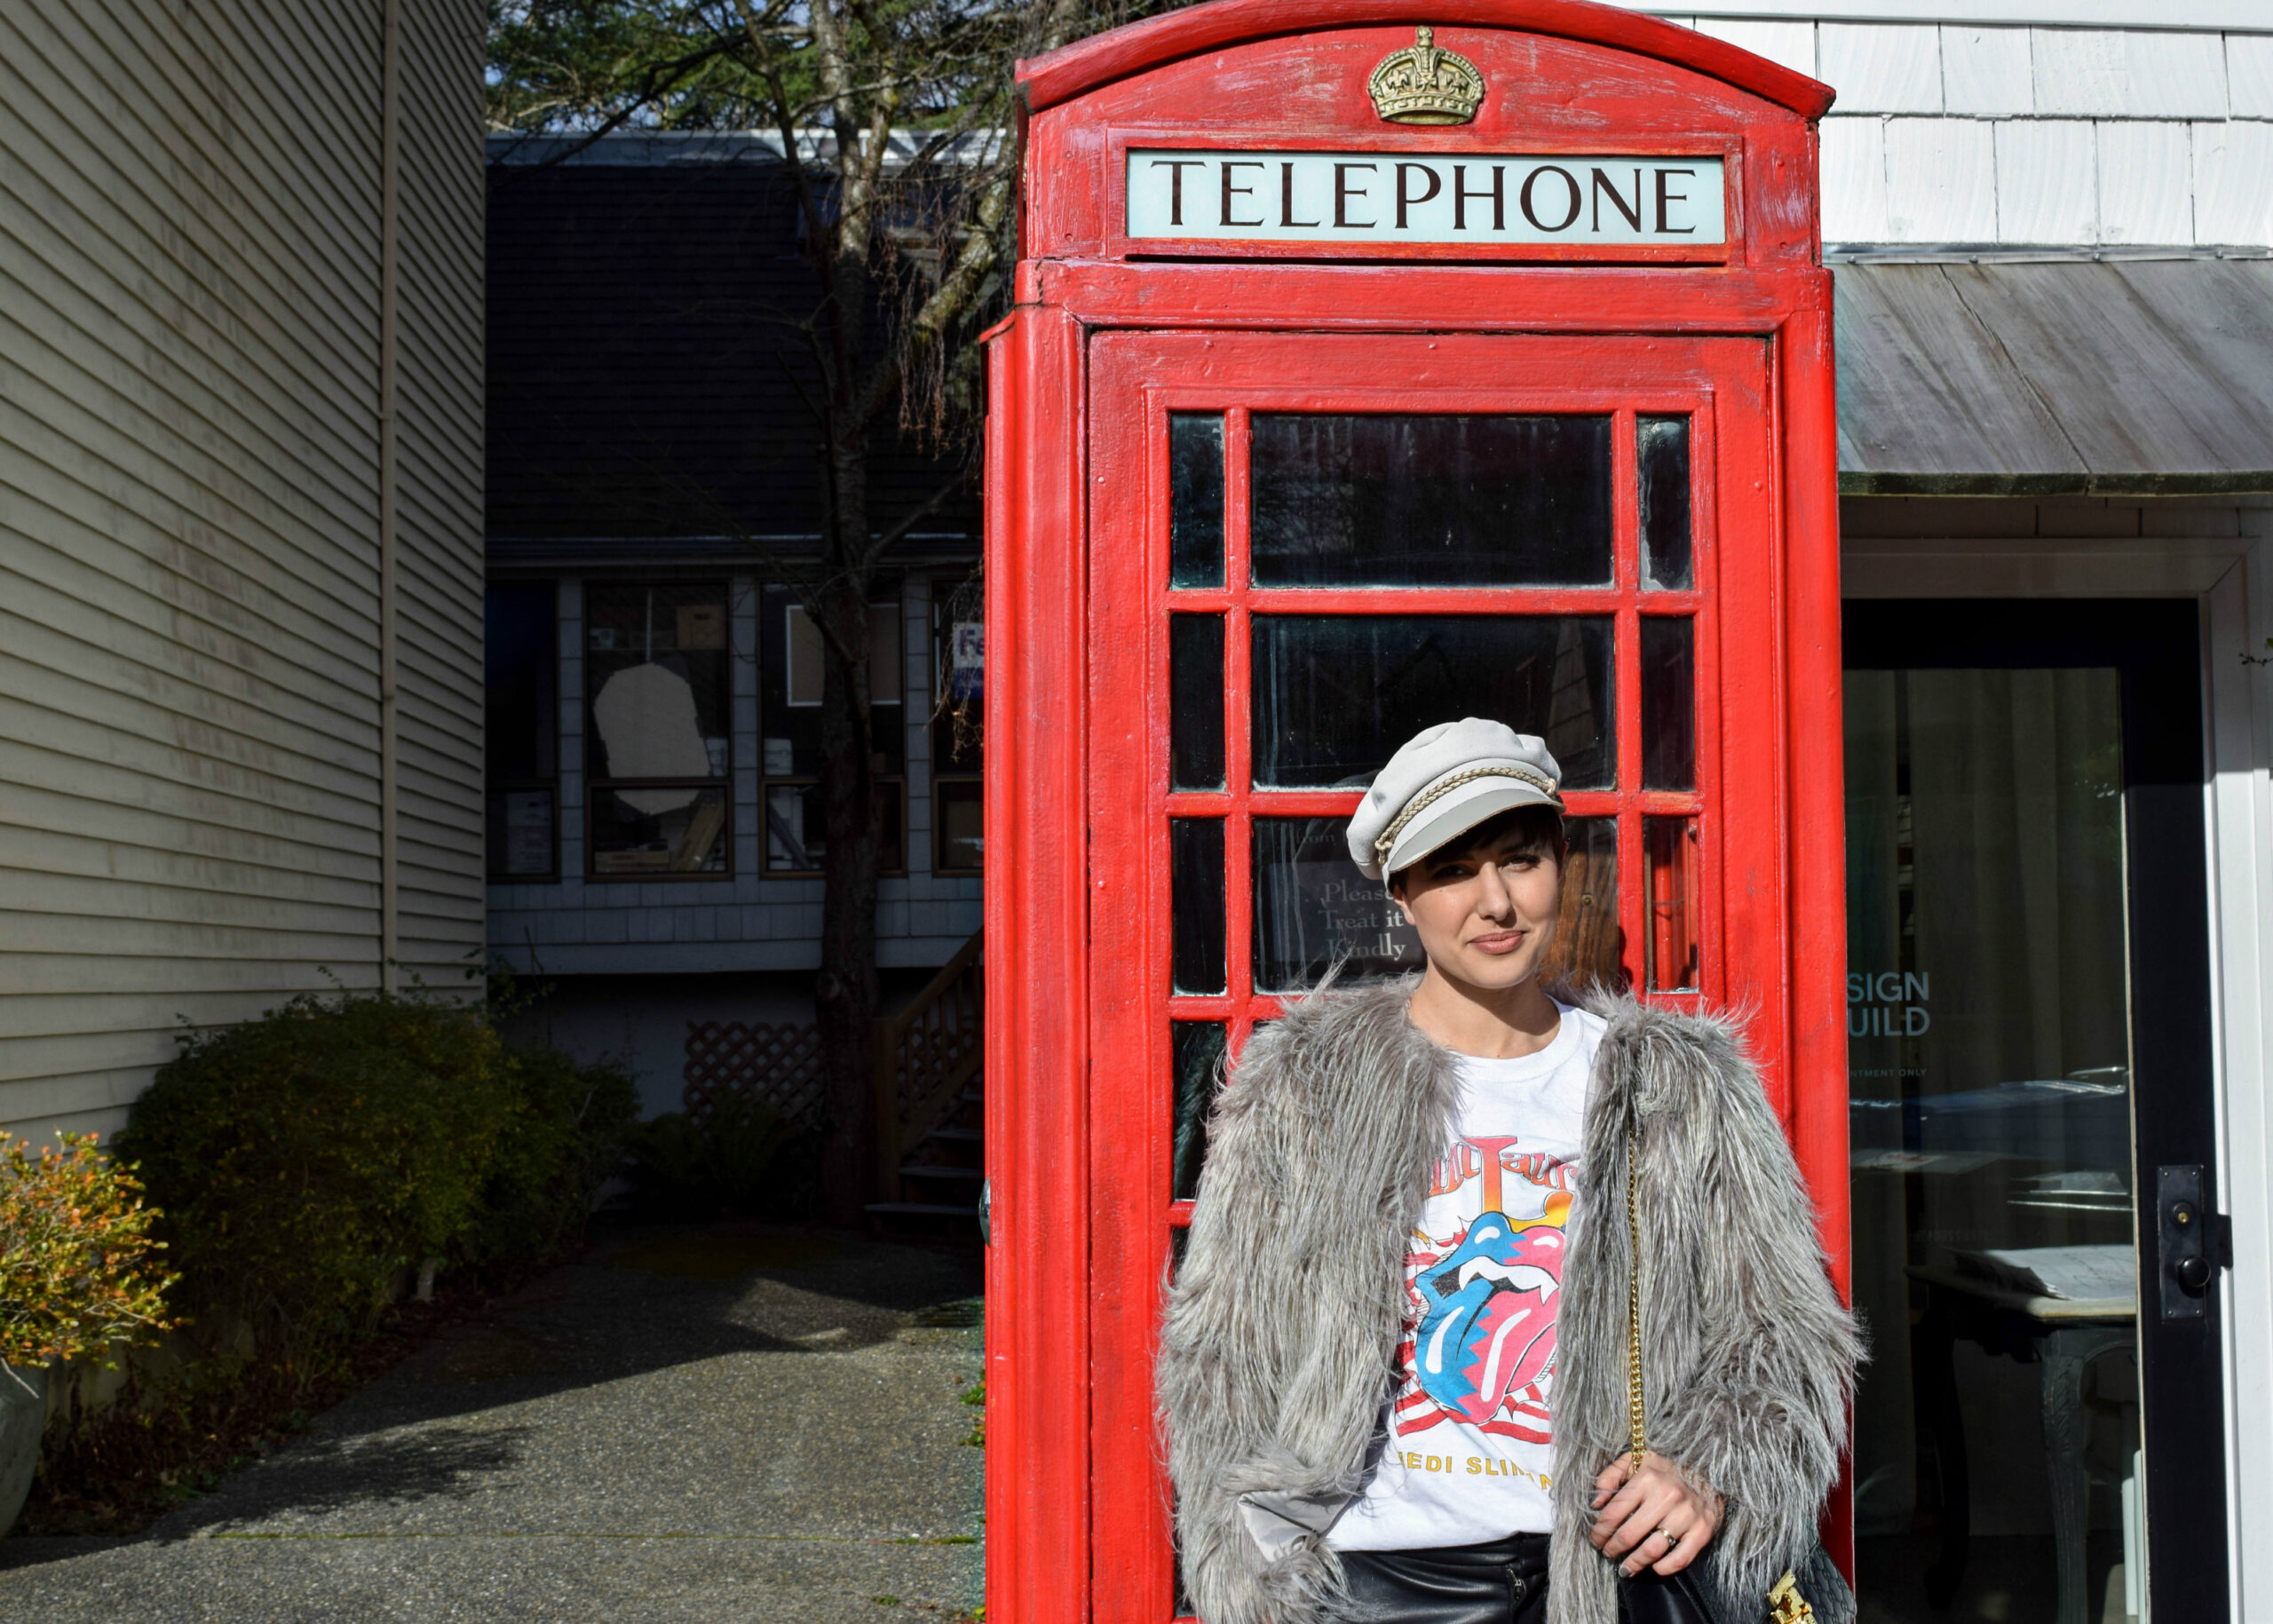 Preparing For London: How to Dress for Your Phone Booth Closeup & Win a Trip to London with Virgin Atlantic